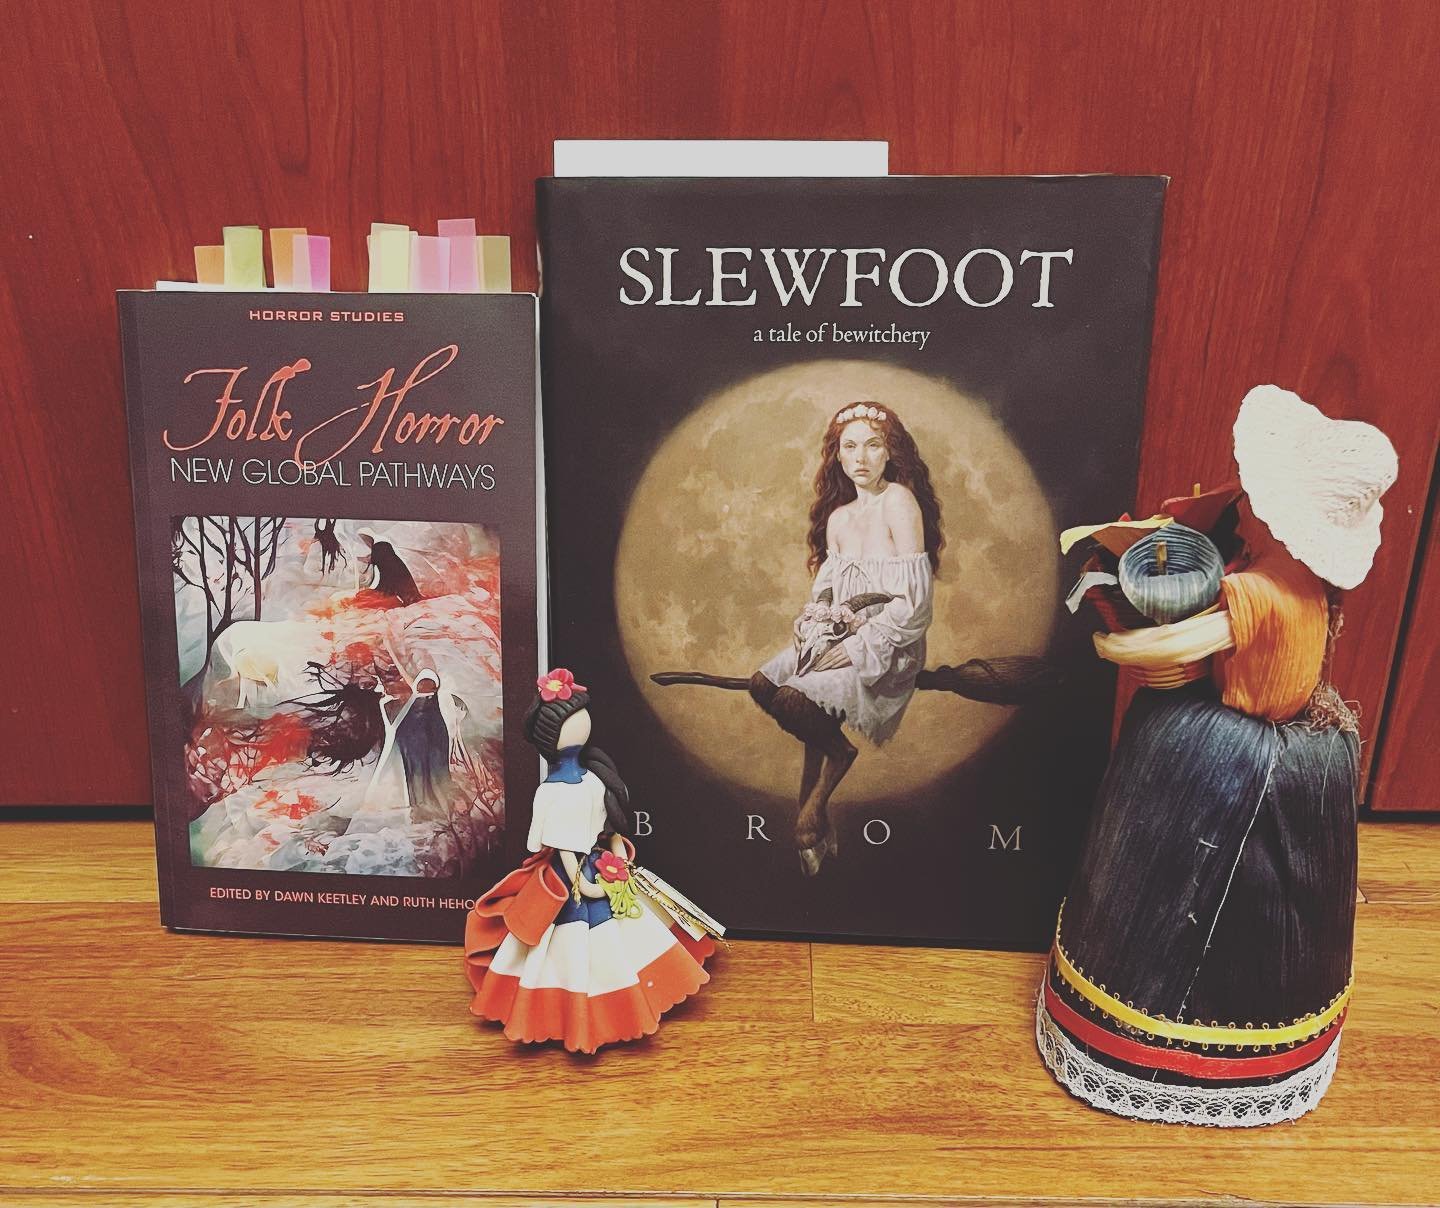 Can you believe I just watched Wicker Man for the first time? It became an instant favorite!

On the left is the Folk Horror book in the Horror Studies series. An invaluable academic source for horror literary analysis. 

On the right is Slewfoot! I&